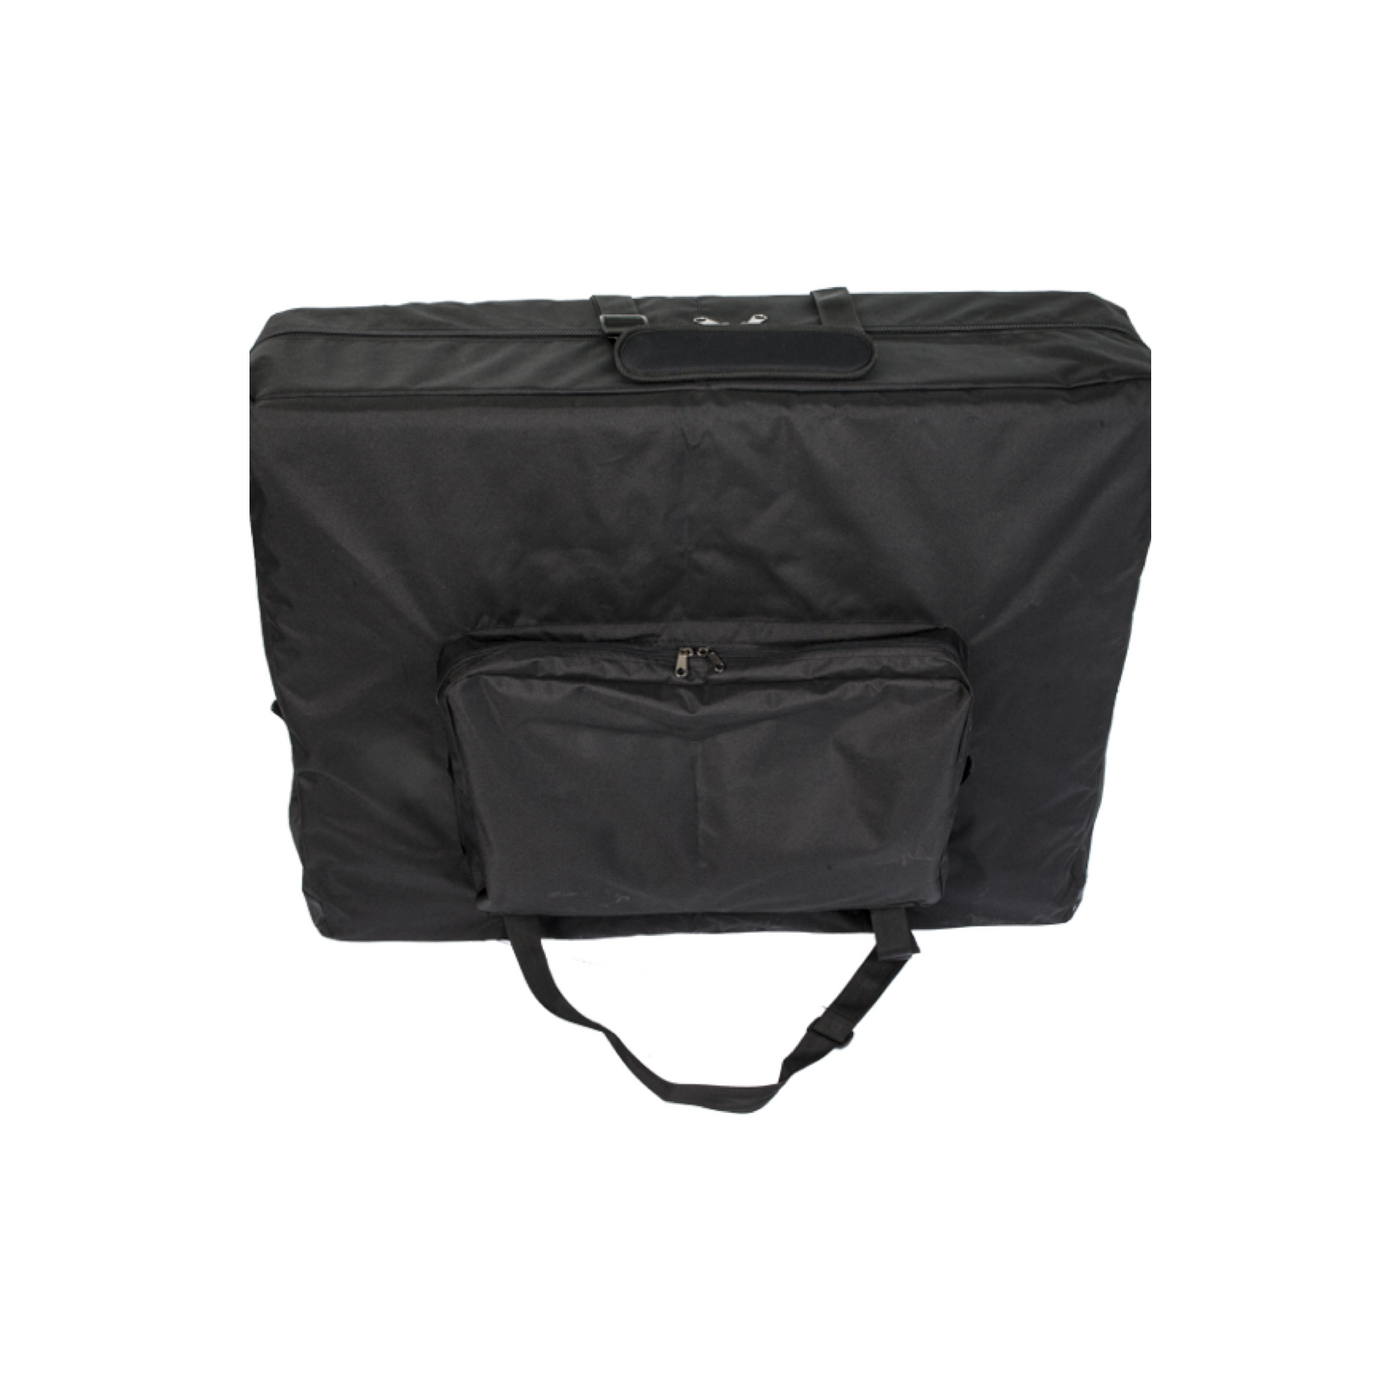 Carrying case for mobile mattress